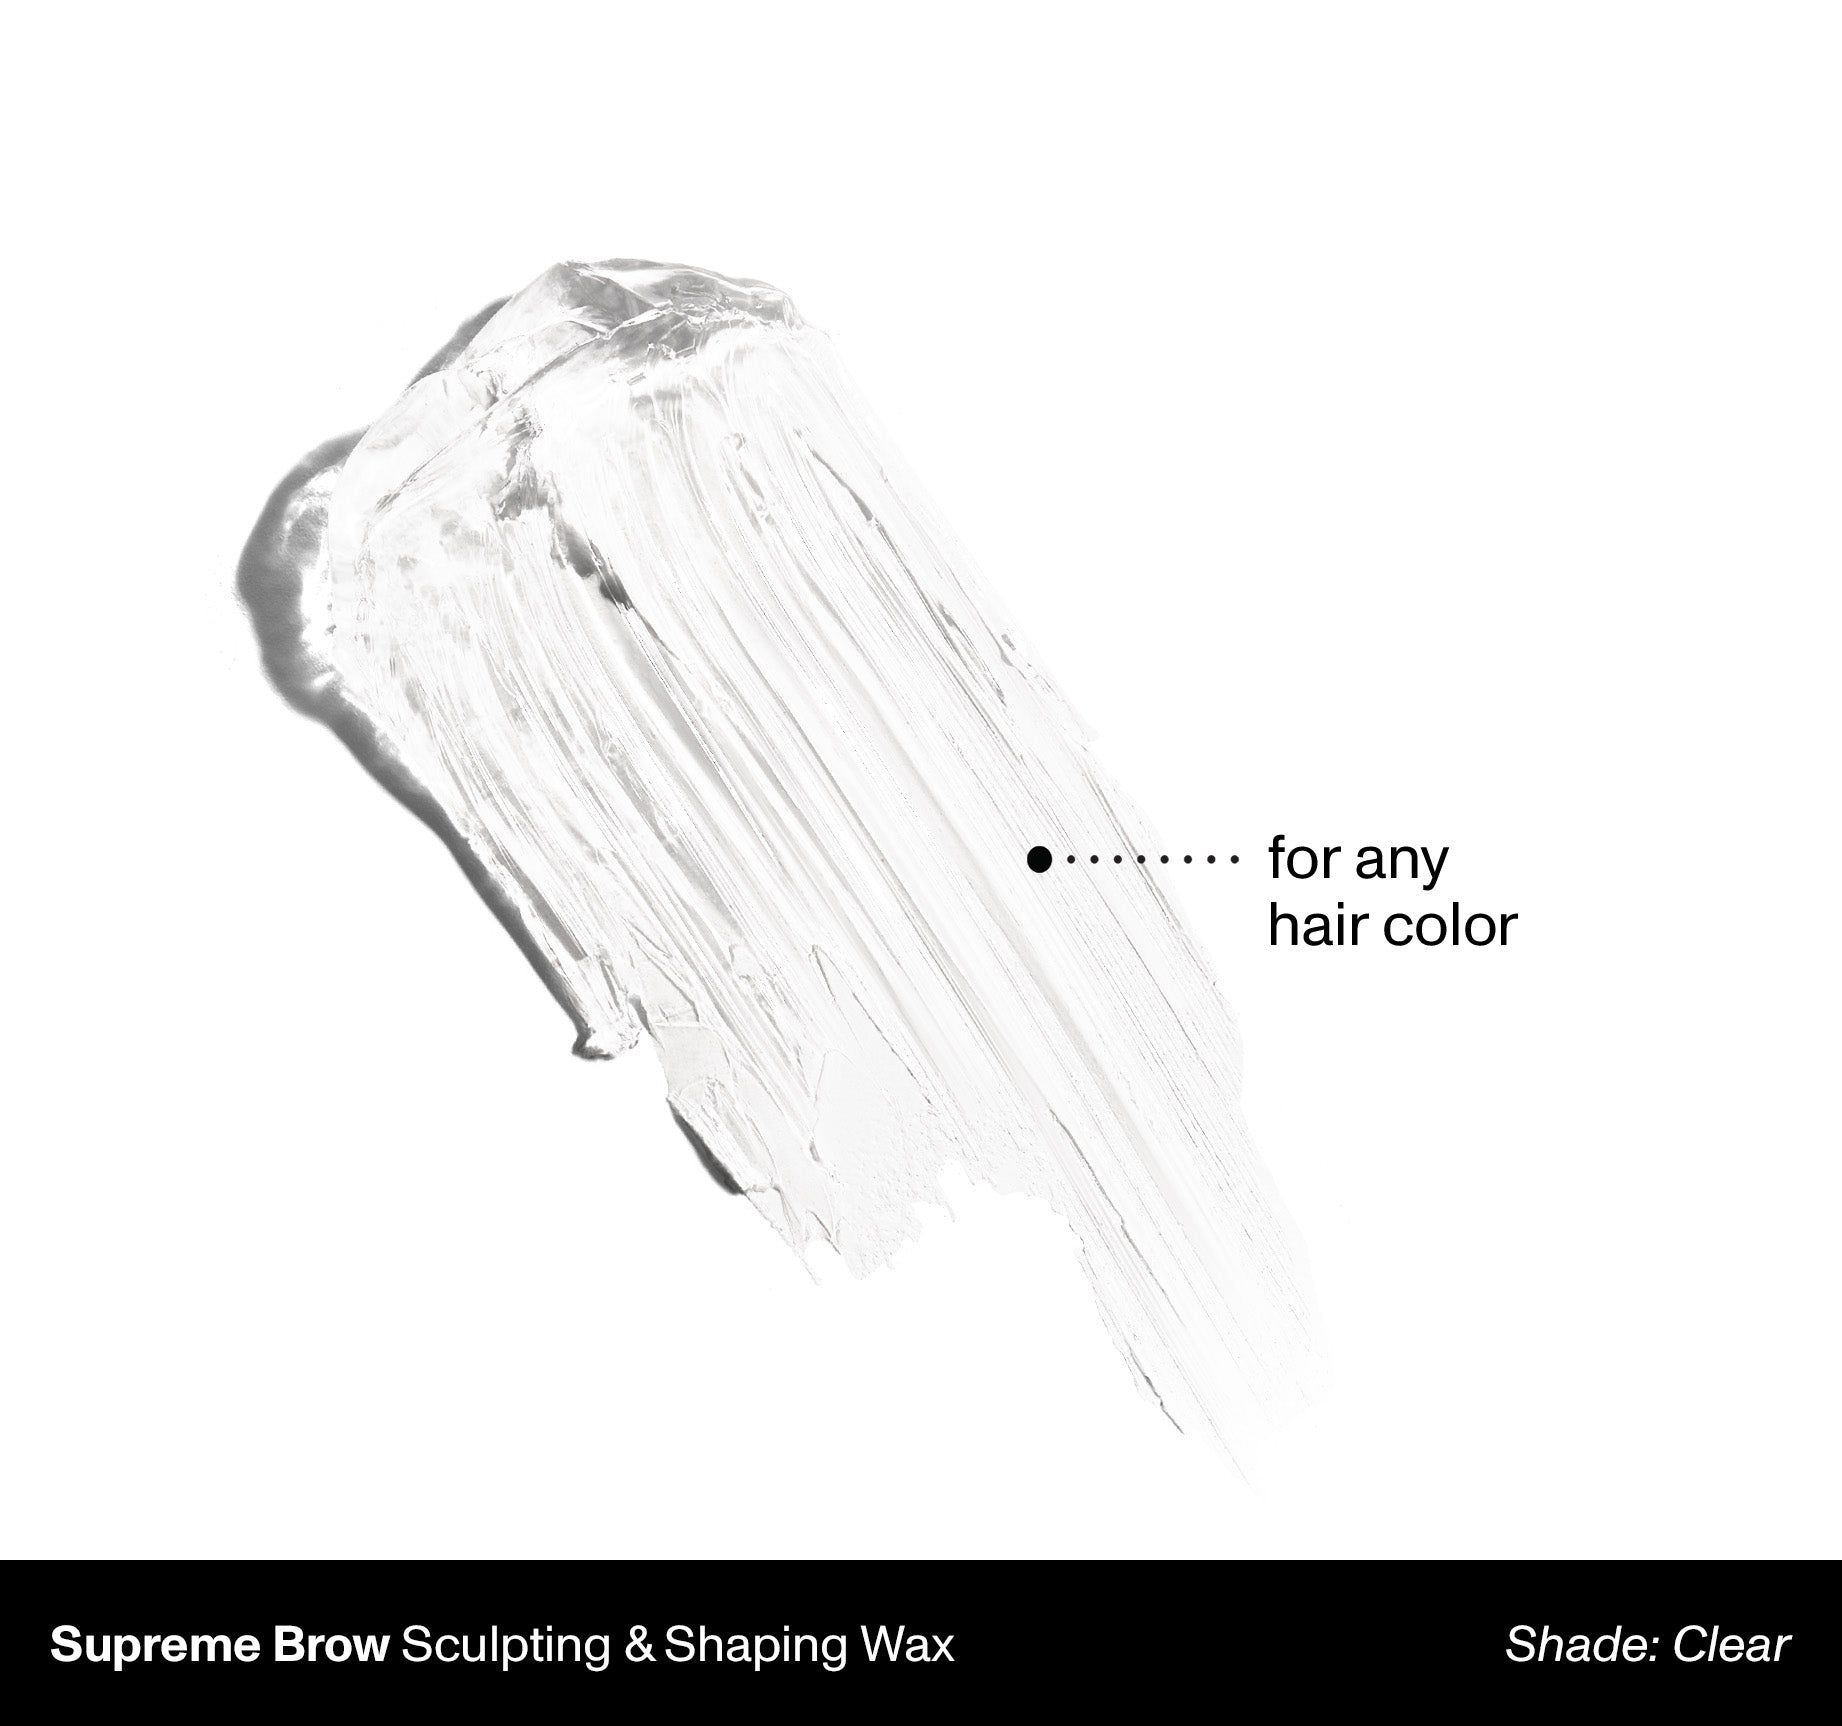 Supreme Brow Sculpting and Shaping Wax - Clear - Image 2